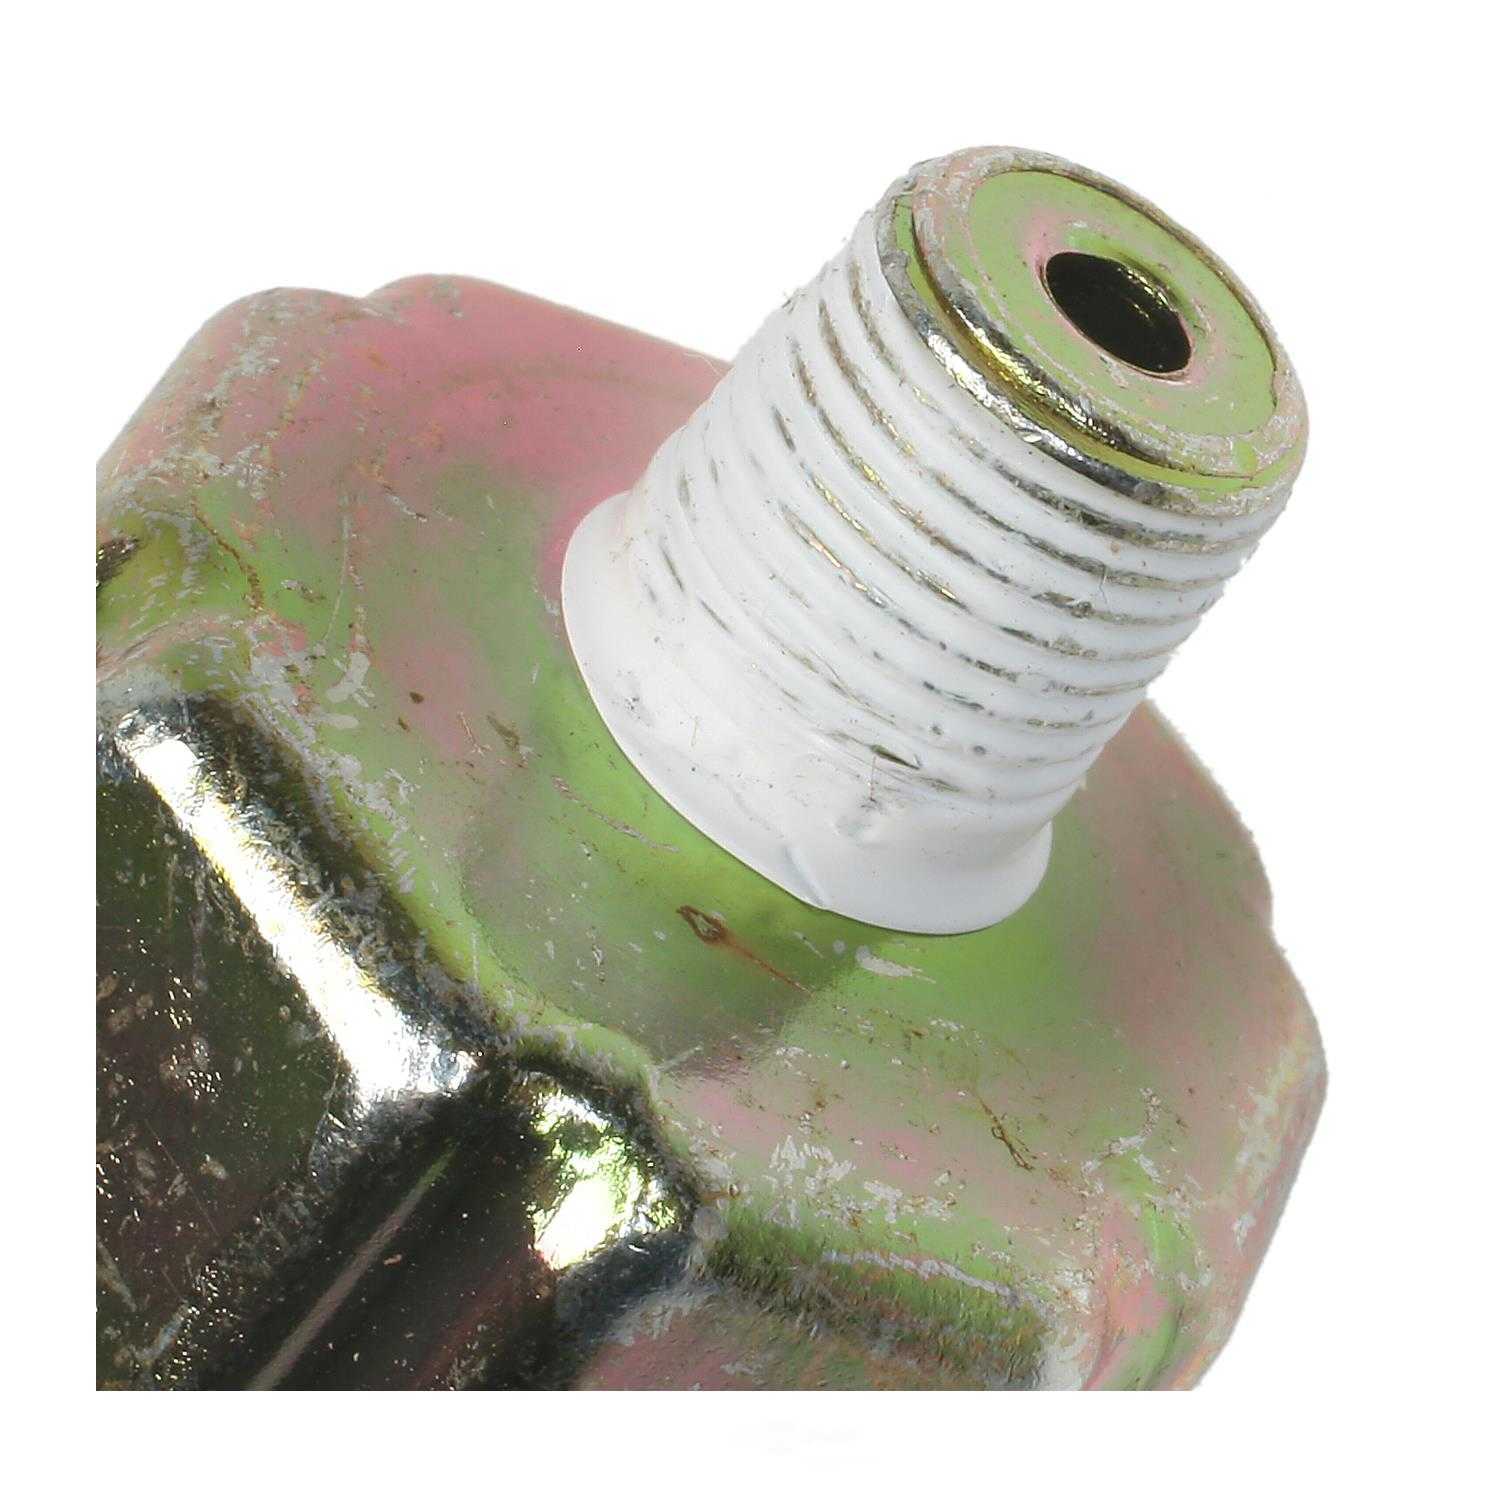 STANDARD MOTOR PRODUCTS - Engine Oil Pressure Sender With Light - STA PS-253